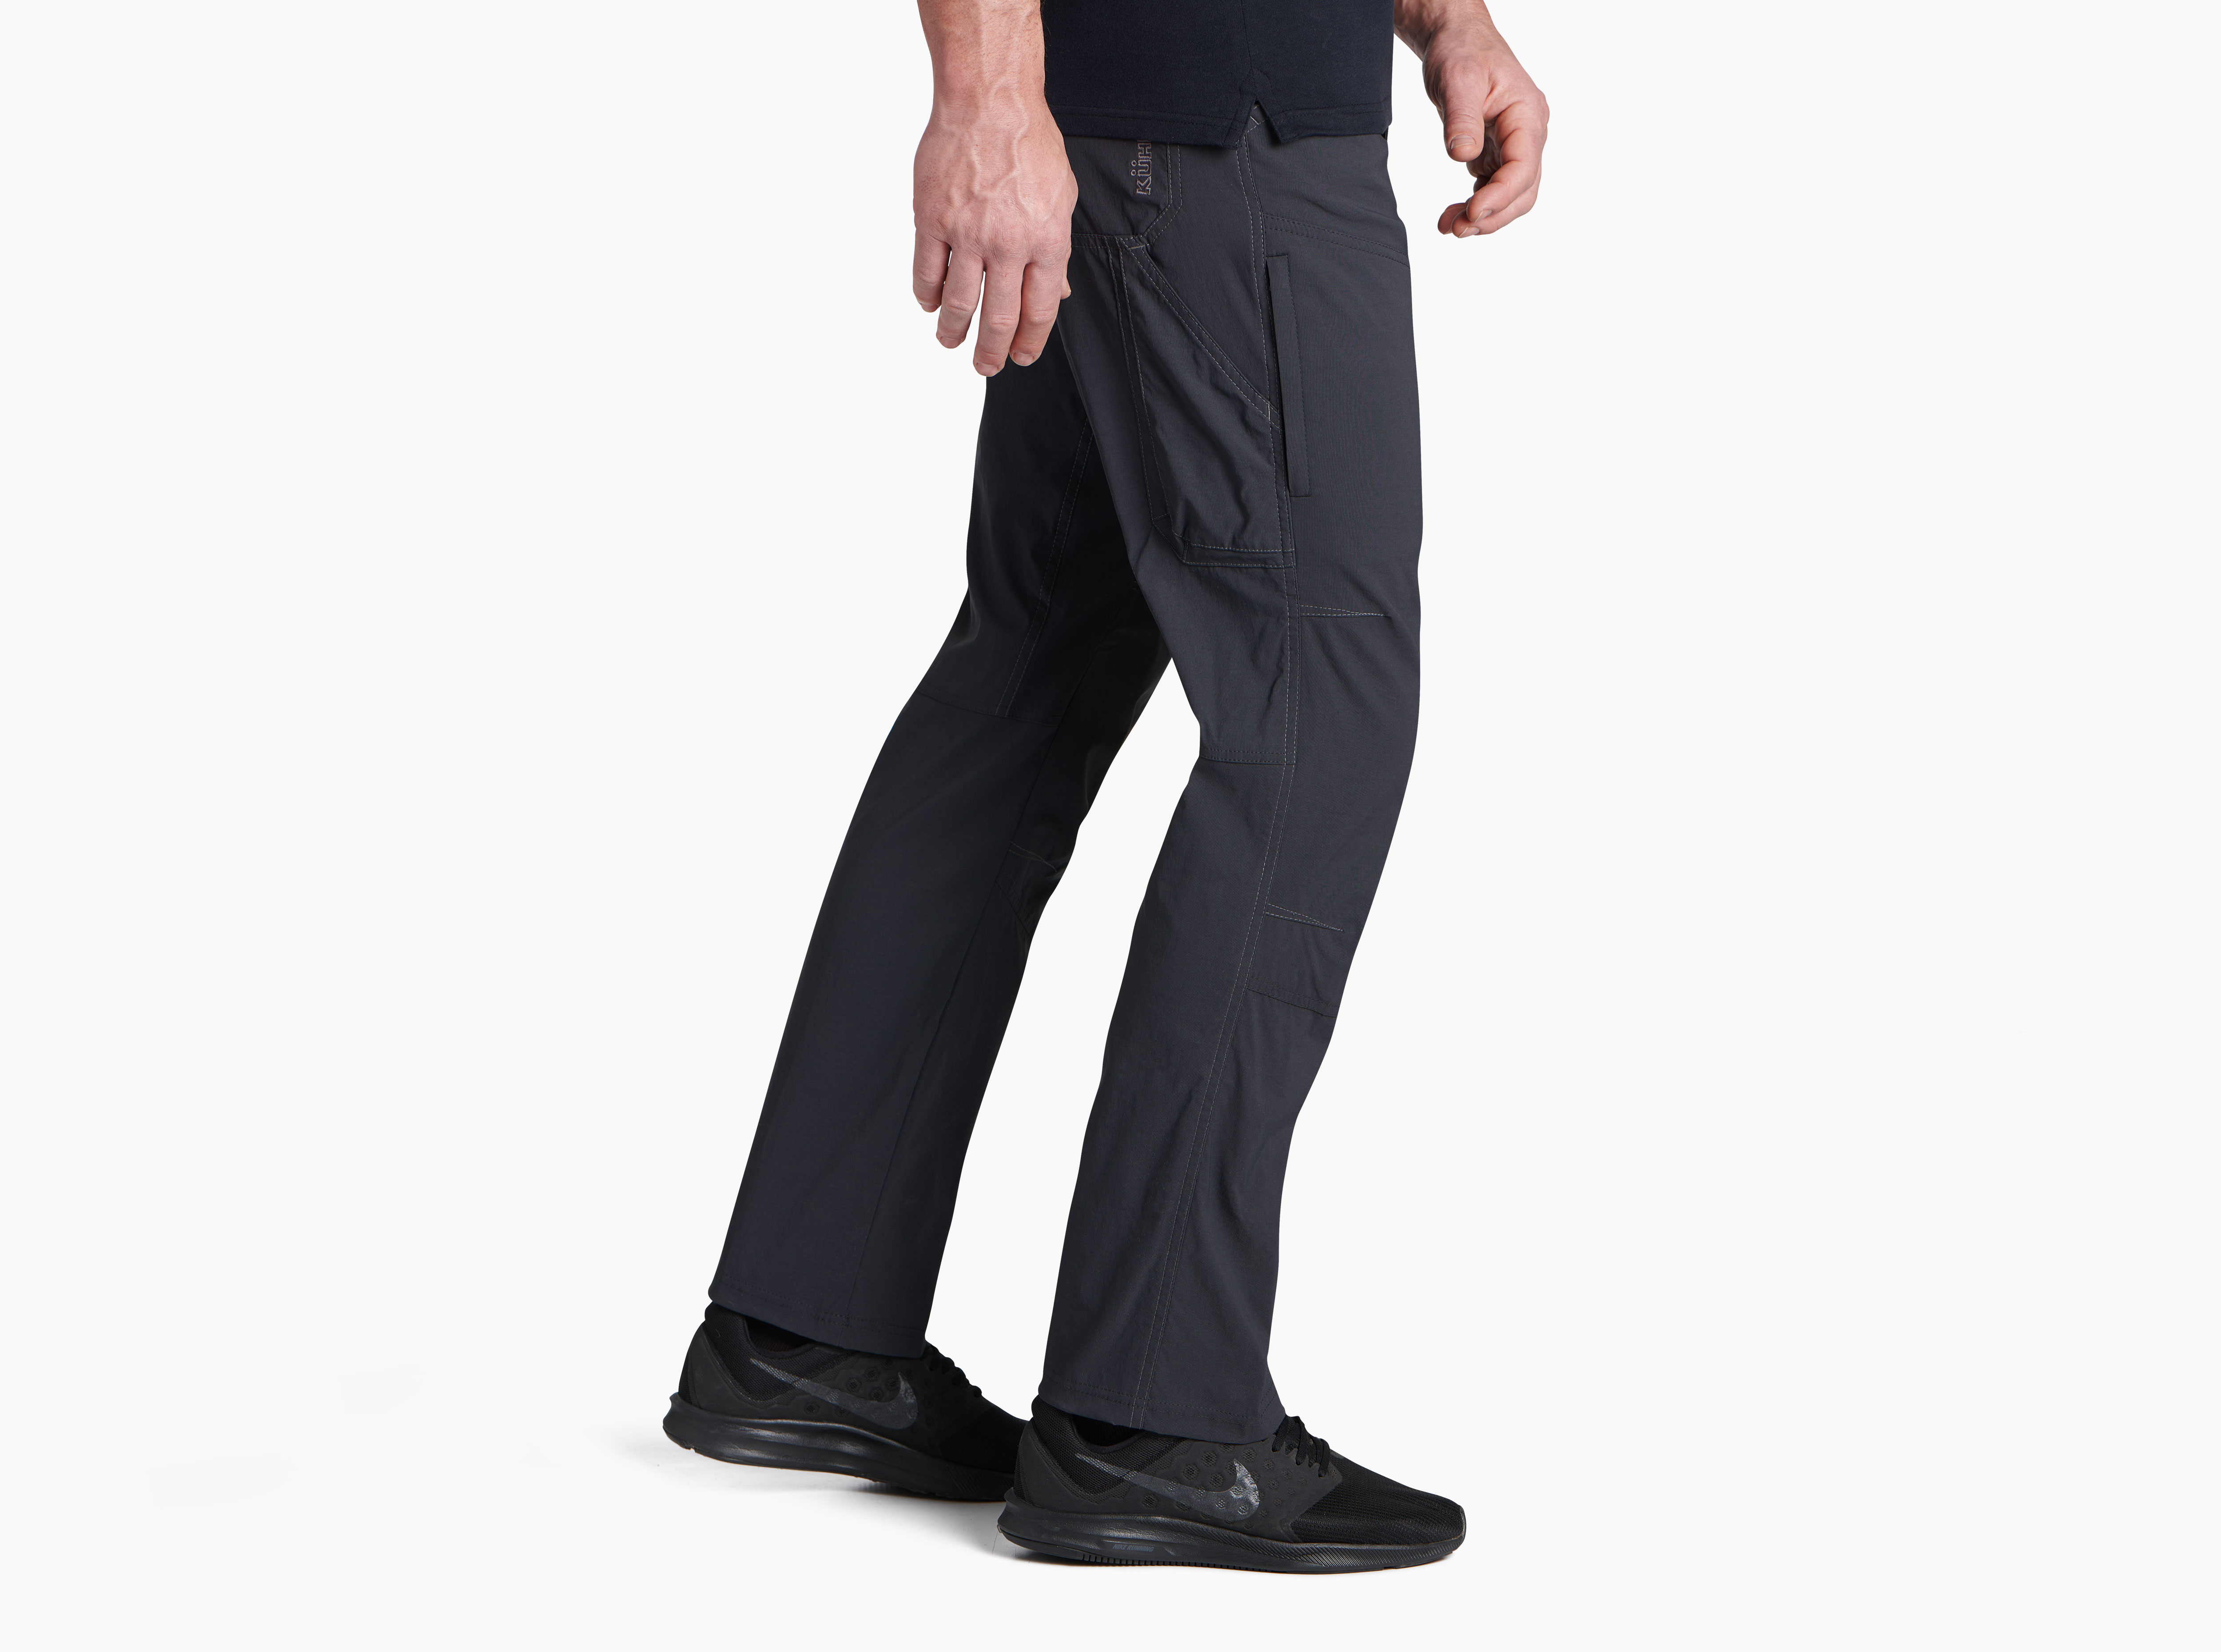 Men's Soft Stretch Tapered Joggers - All in Motion™ Black S 